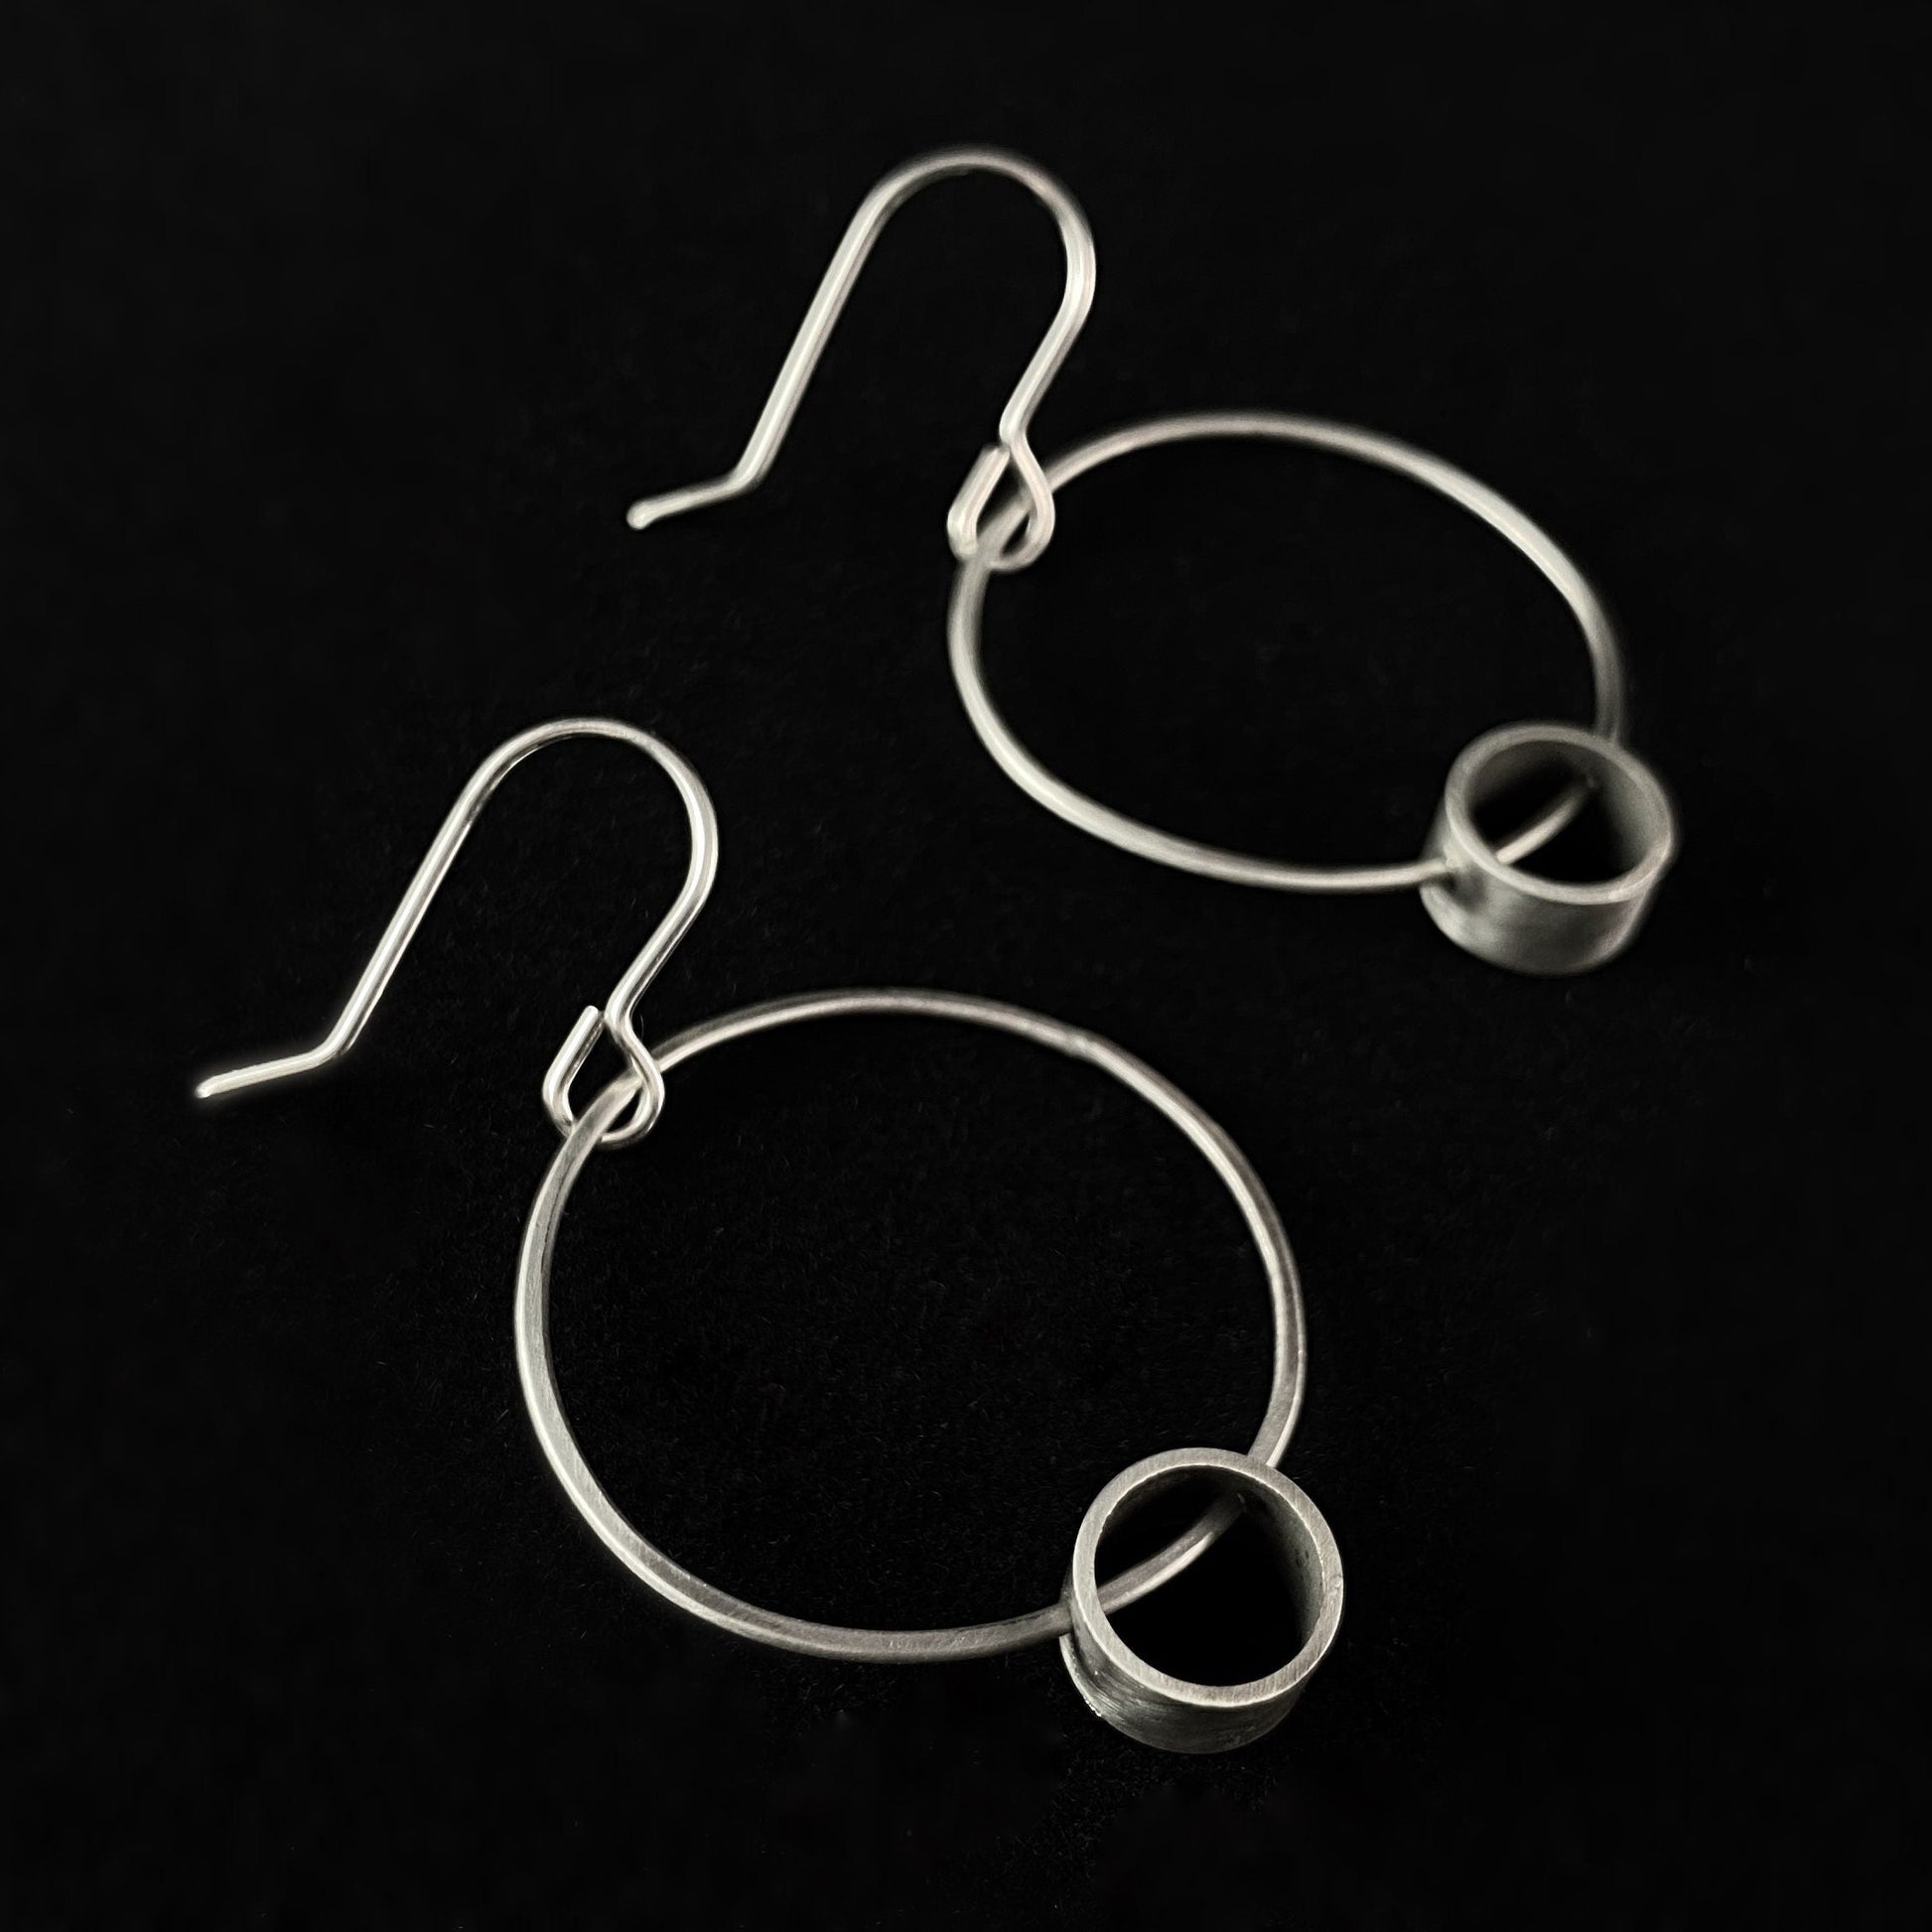 Silver Hoop Earrings with Small Circle Detail, Handmade - Recycled Materials